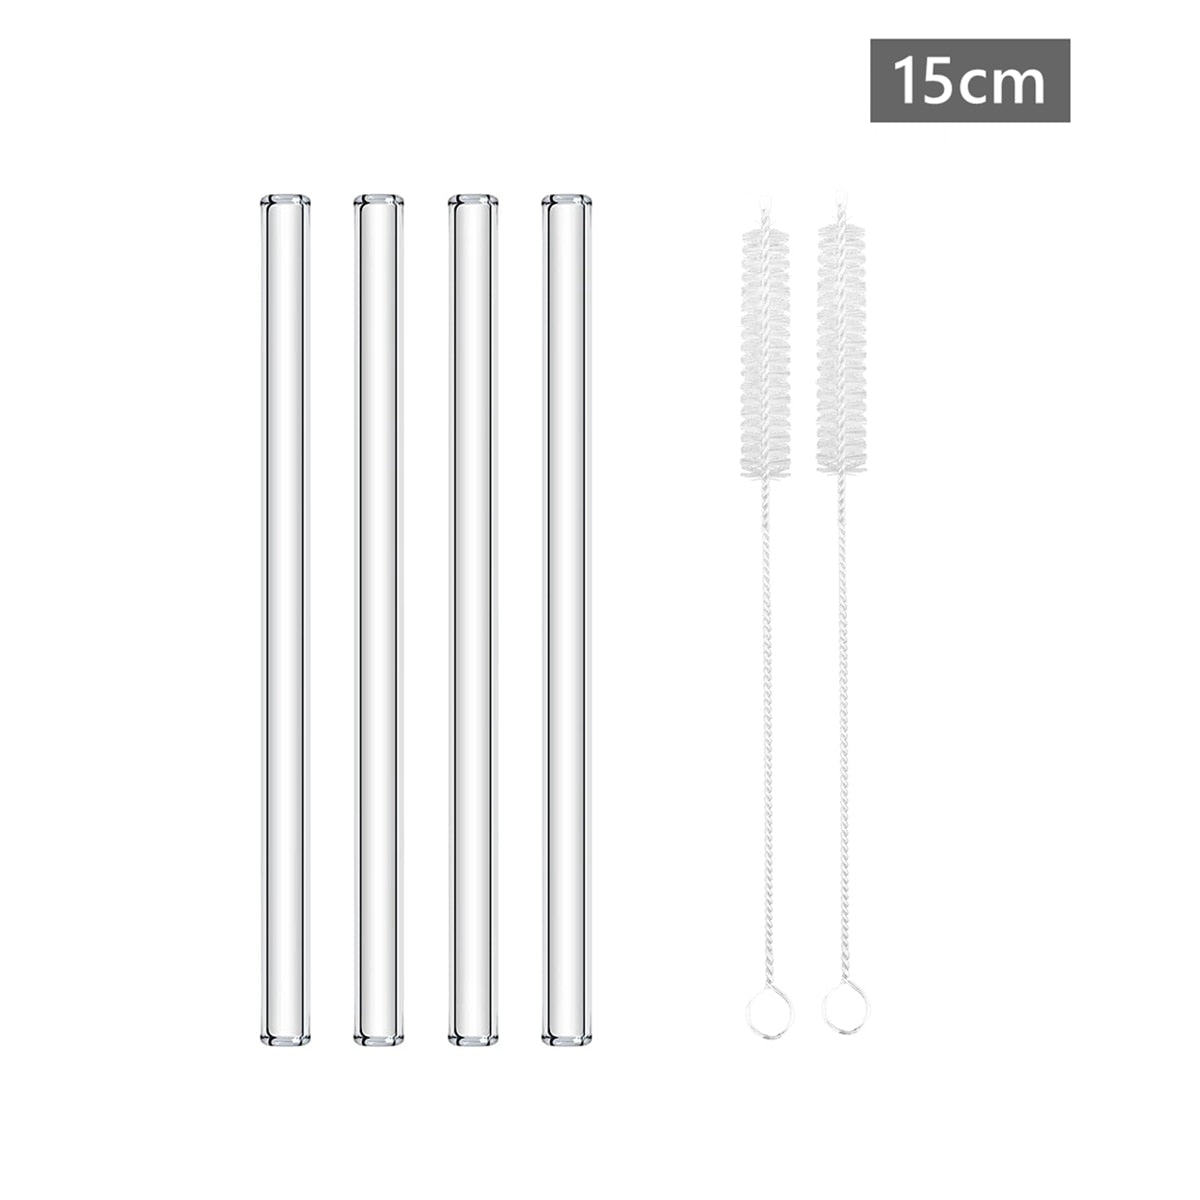 4/8pcs Reusable Glass Straws Eco-friendly Drinking Straws for Smoothies Milk Coffee Drinks Bar Accessories Short Cocktail Straws